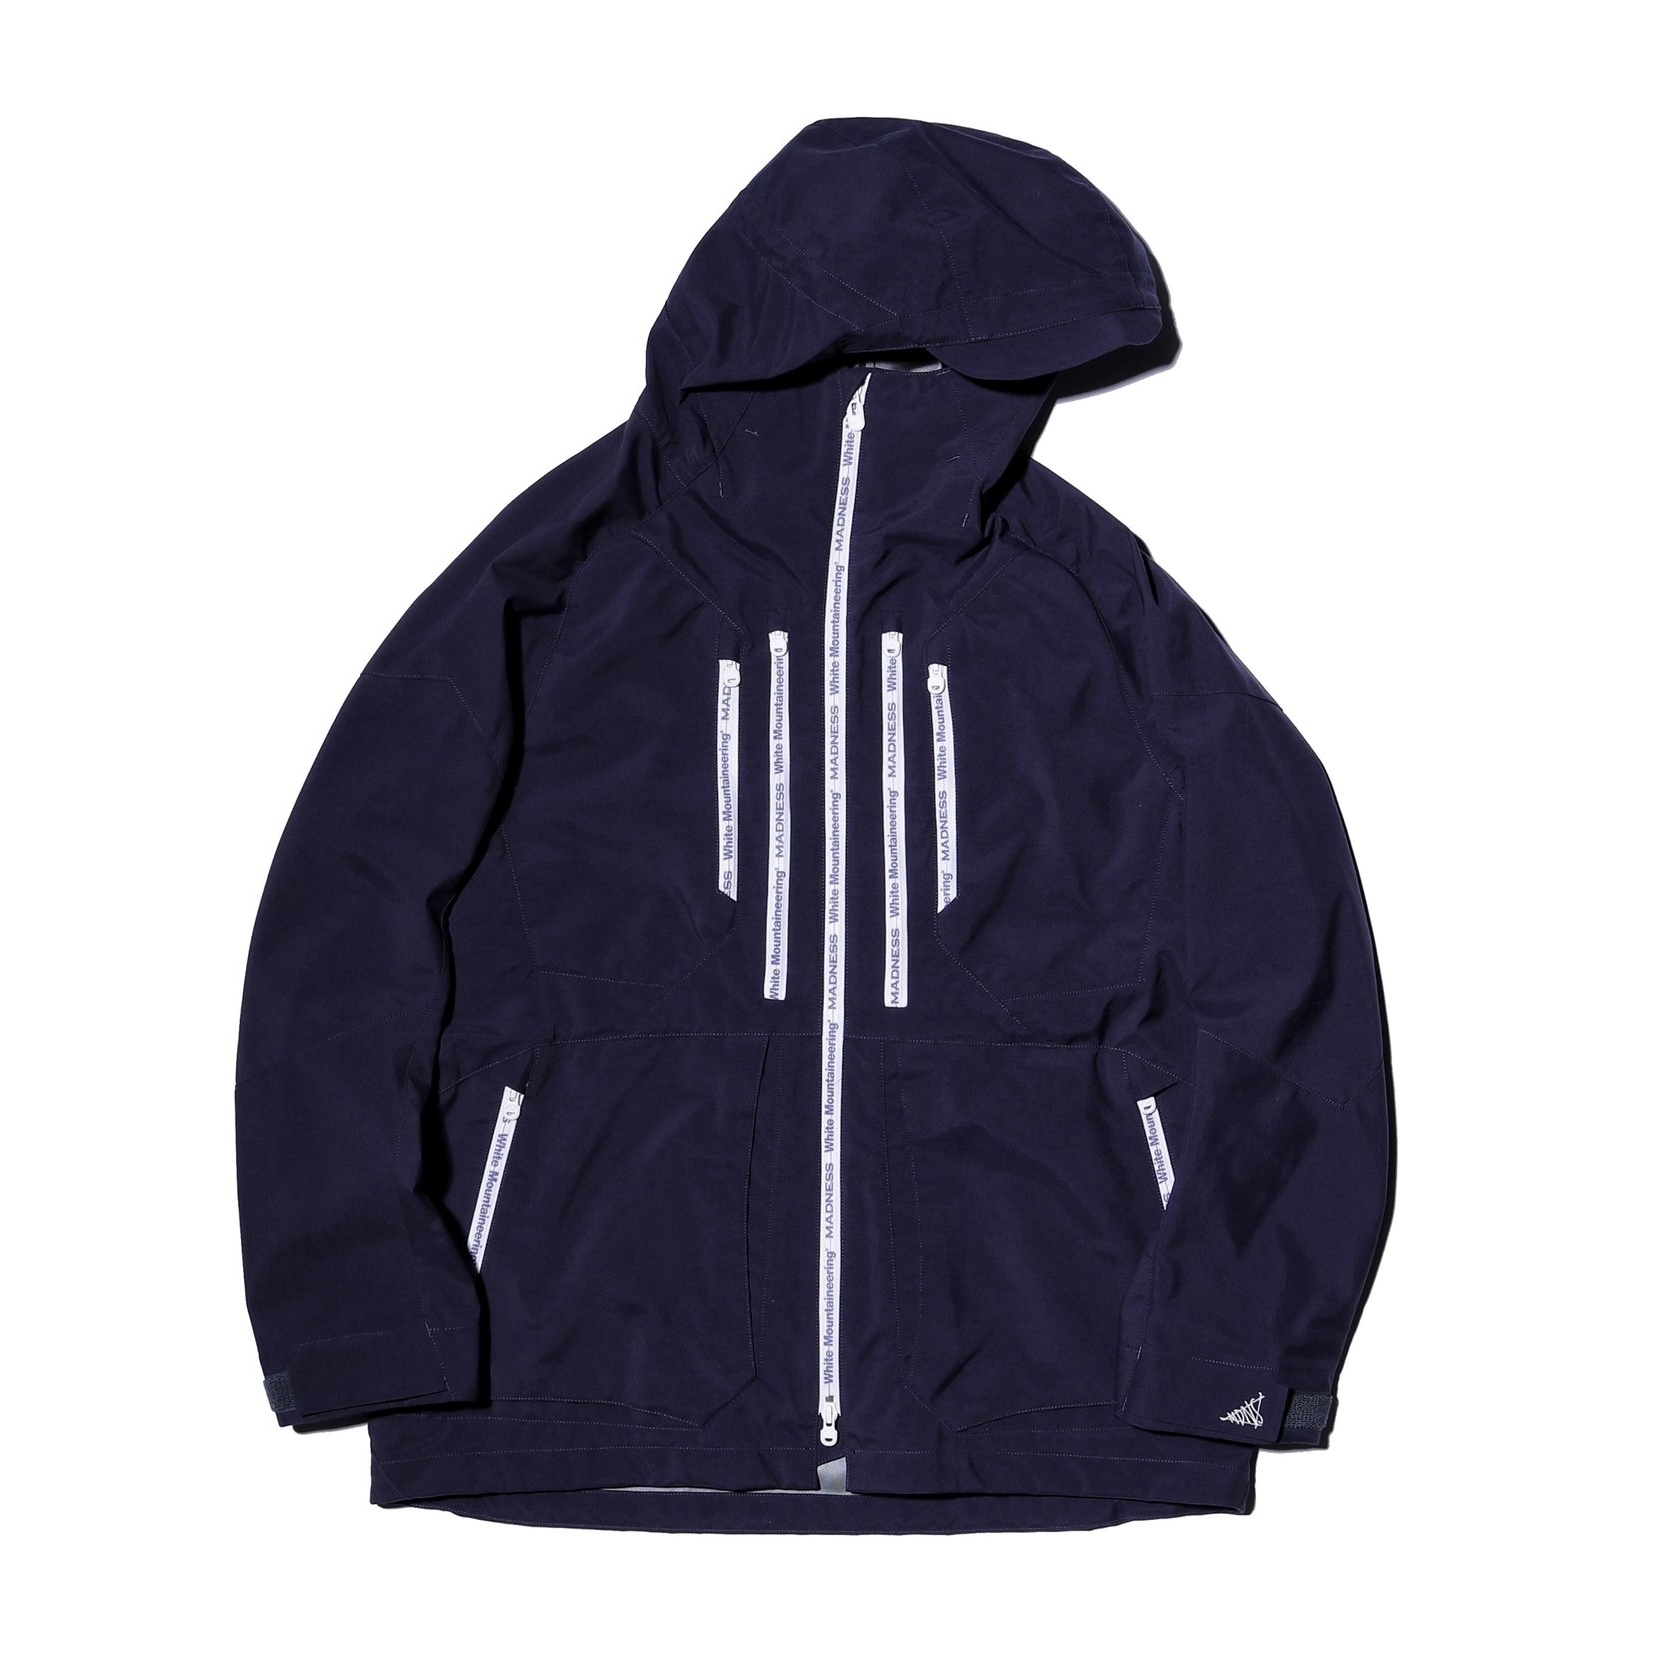 White Mountaineering celebrates MADNESS' 4th Anniversary with a 